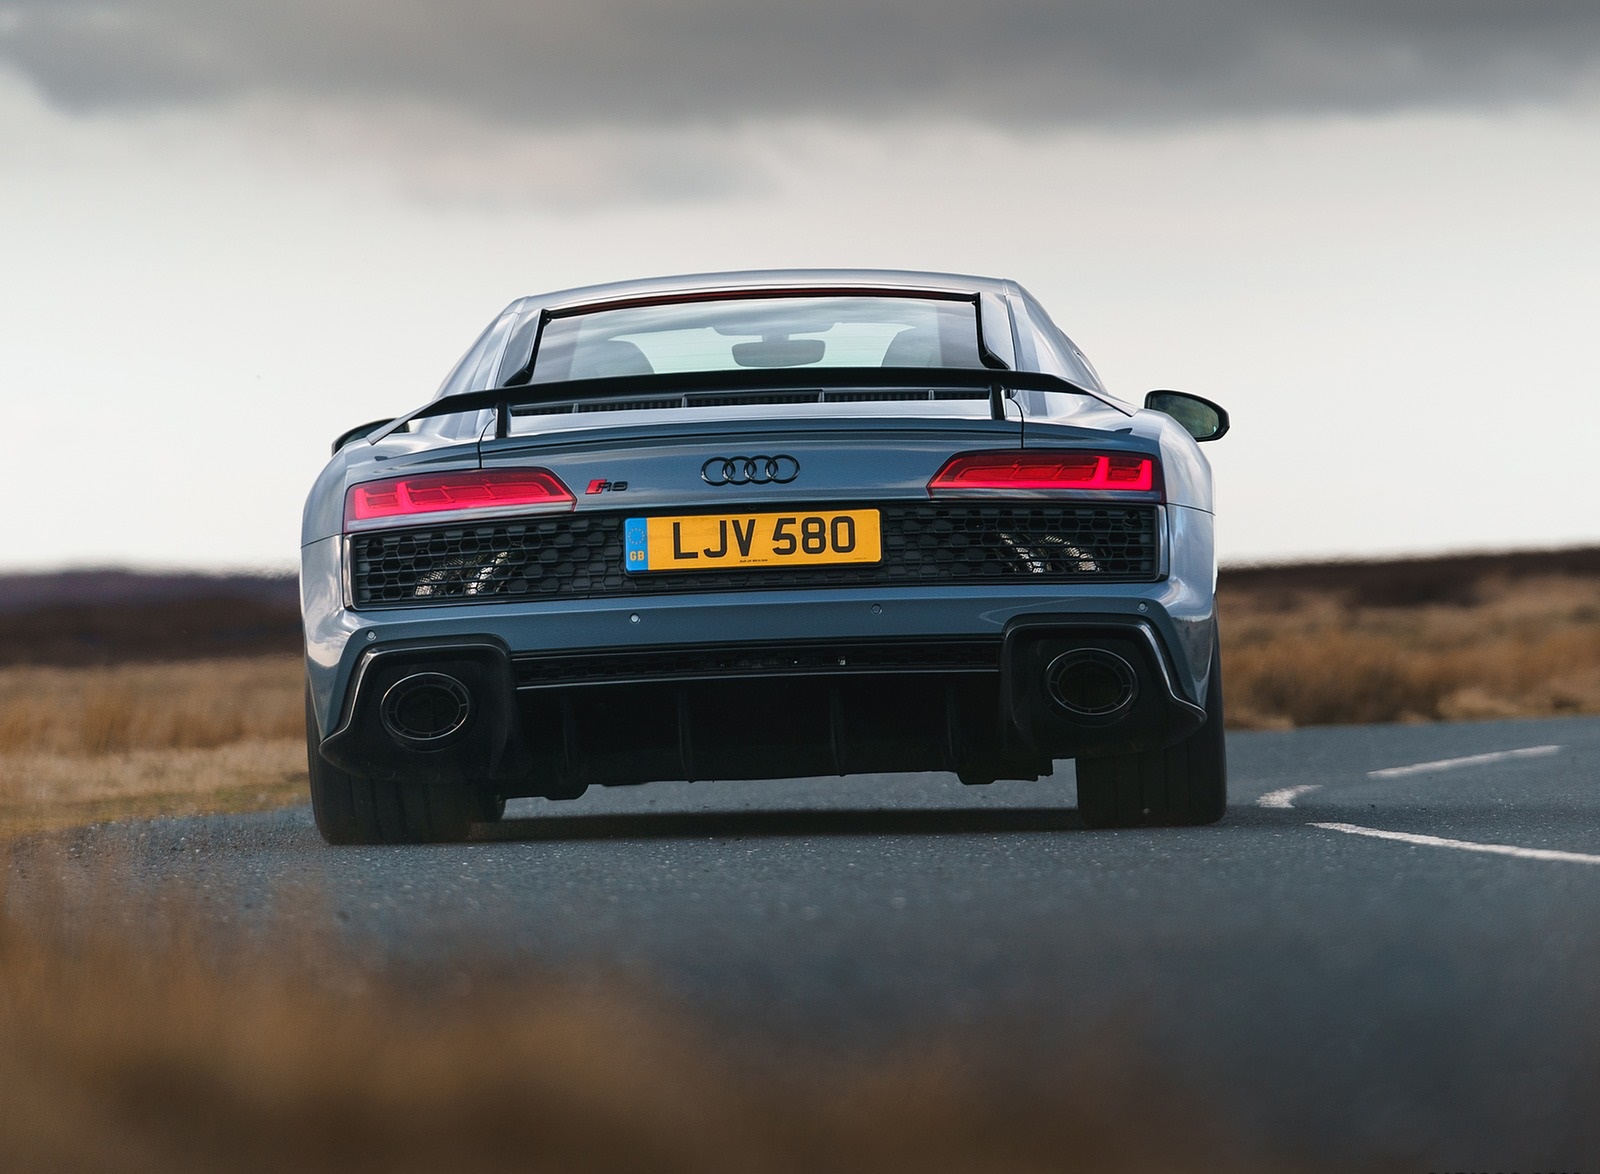 2019 Audi R8 V10 Coupe Performance quattro (UK-Spec) Rear Wallpapers #126 of 199